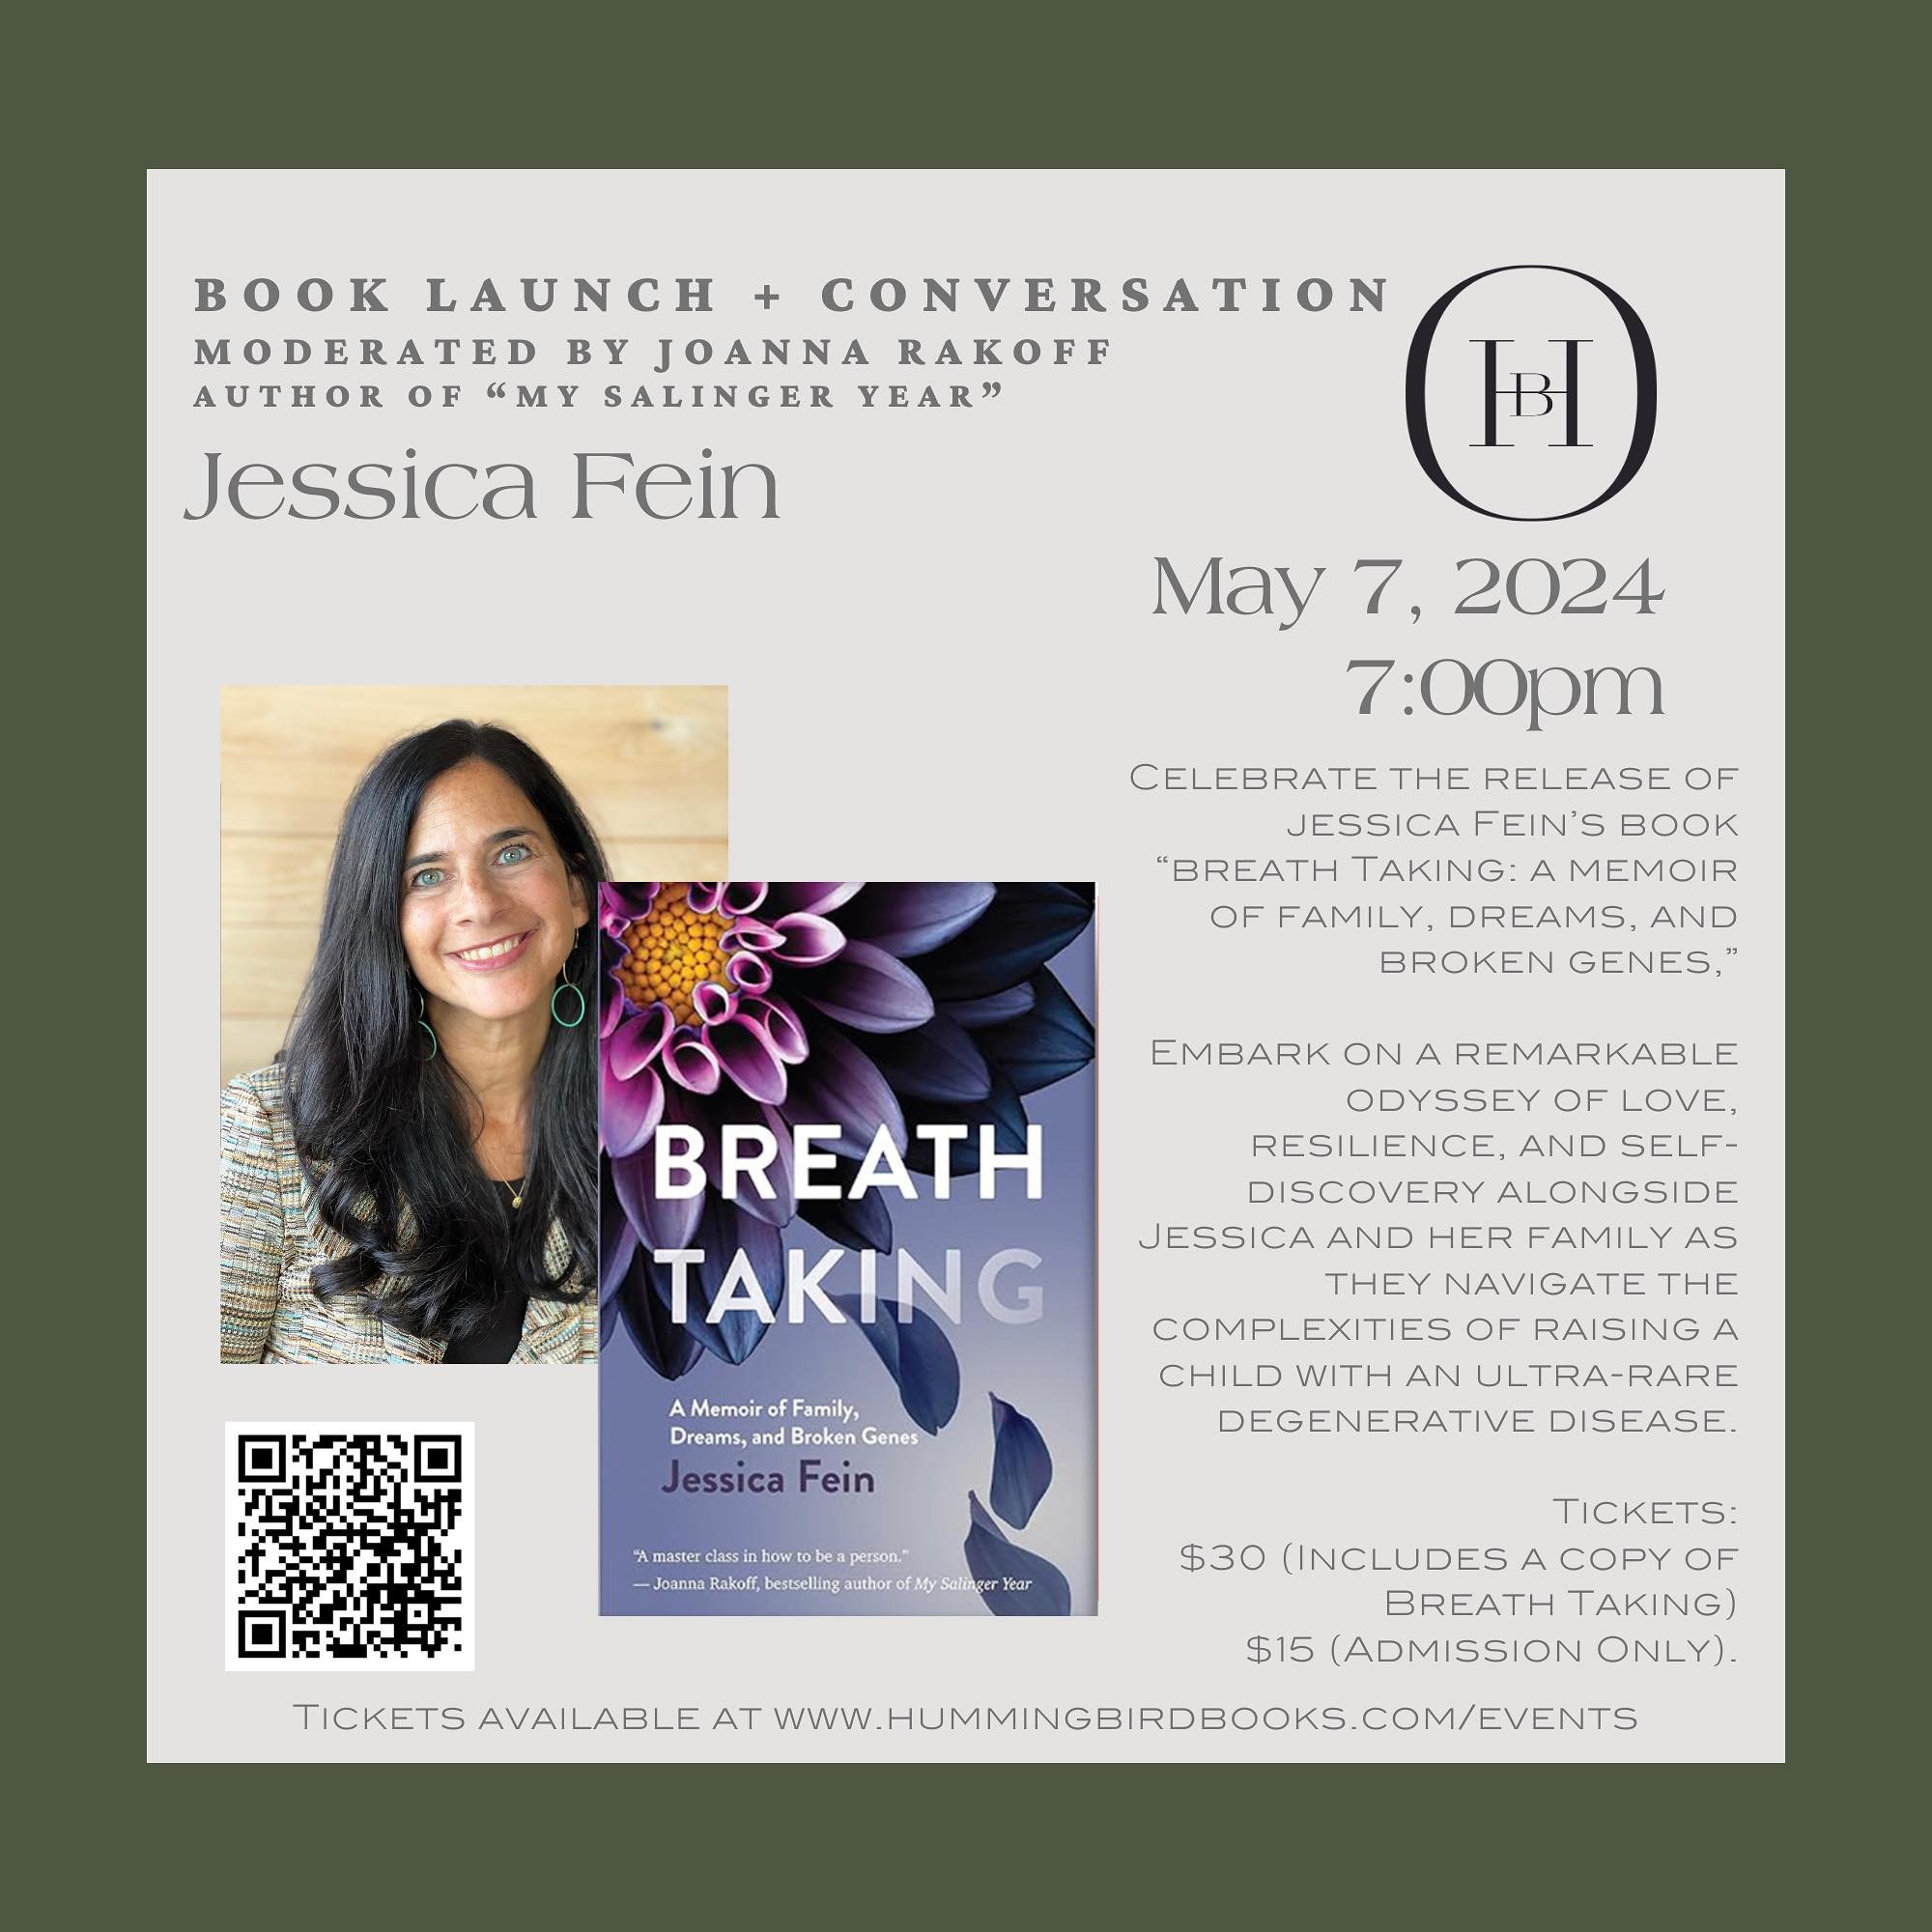 We are so excited to be hosting the book launch for &ldquo;Breath Taking: A Memoir of Family, Dreams, and Broken Genes,&rdquo; by @feinjessica. Jessica will be joined in conversation with @joannarakoff, author of &ldquo;My Salinger Year.&rdquo;

Tick